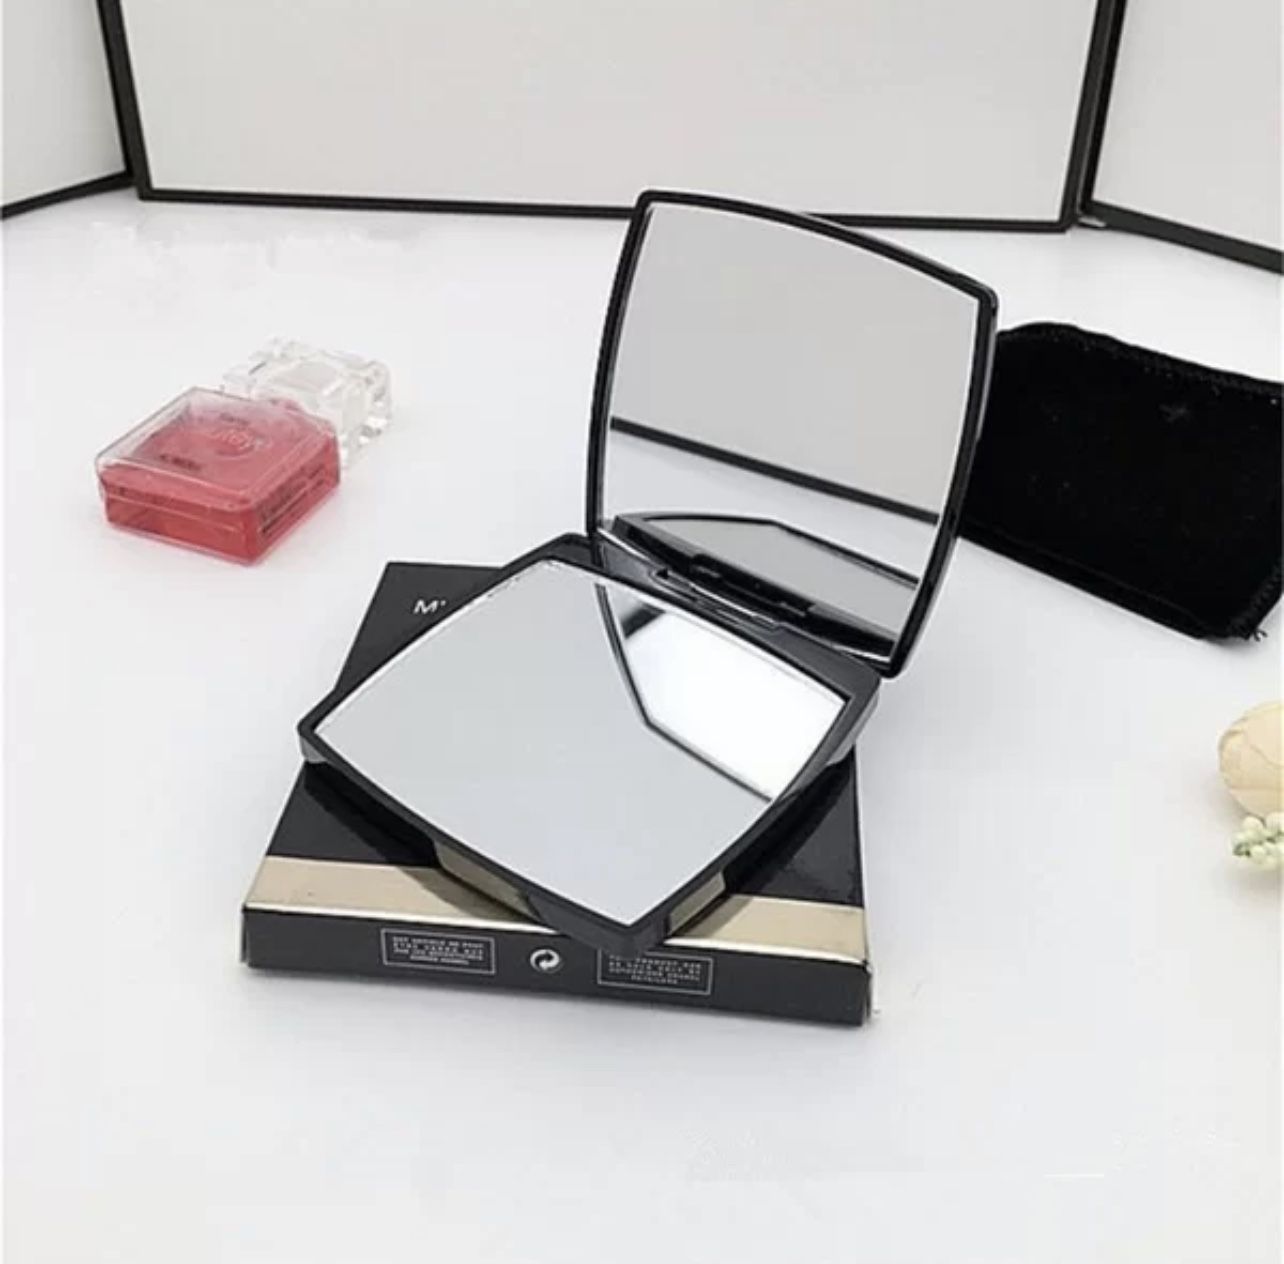 SALE! Authentic CHANEL Compact Double-Sided Mirror - Shipping Only